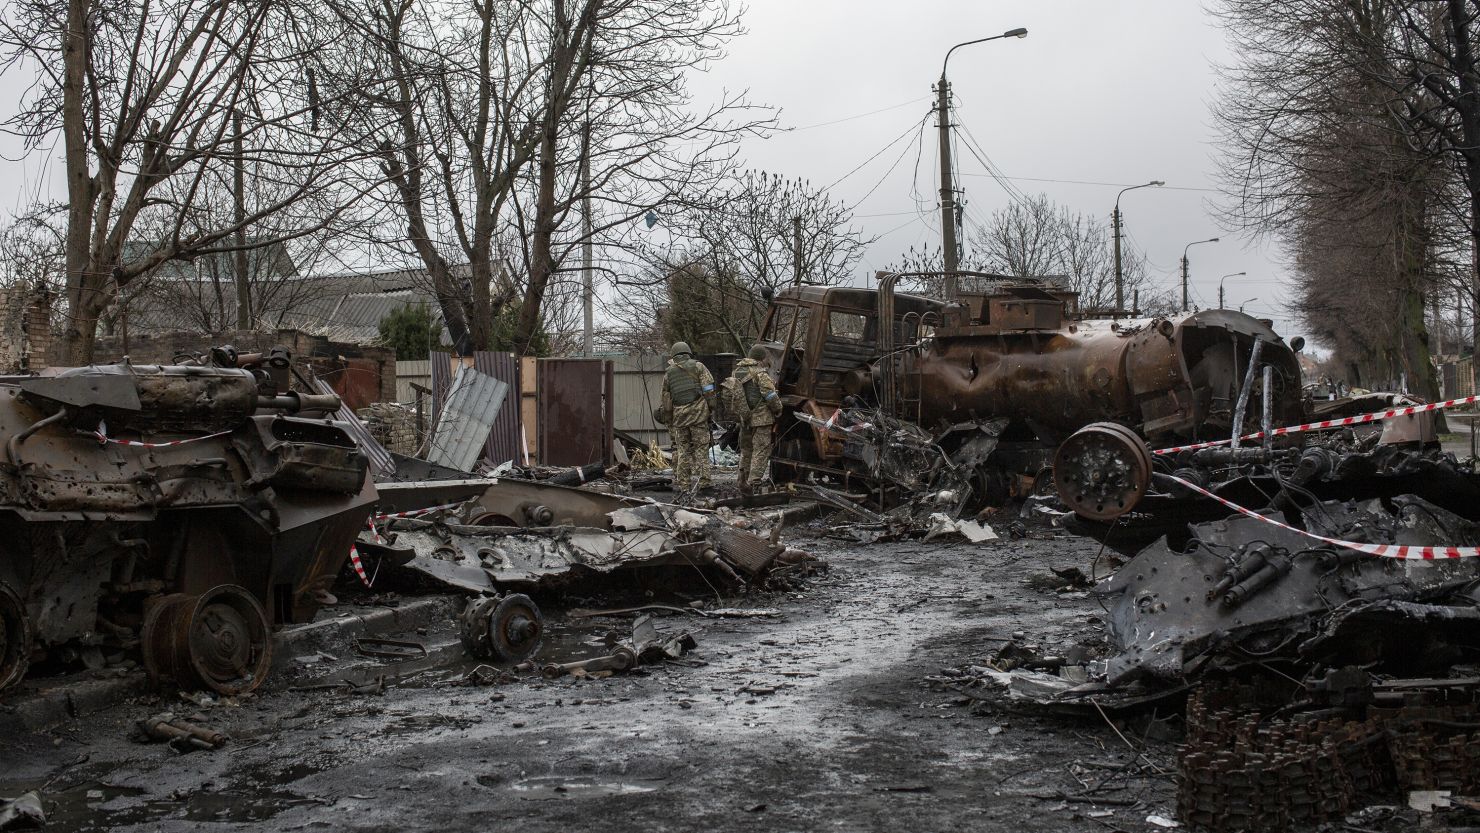 Ukrainian servicemen inspect the wreckage of Russian military vehicles in the town of Bucha, on the outskirts of Kyiv, on April 8, 2022 following the Russian forces' withdrawal.